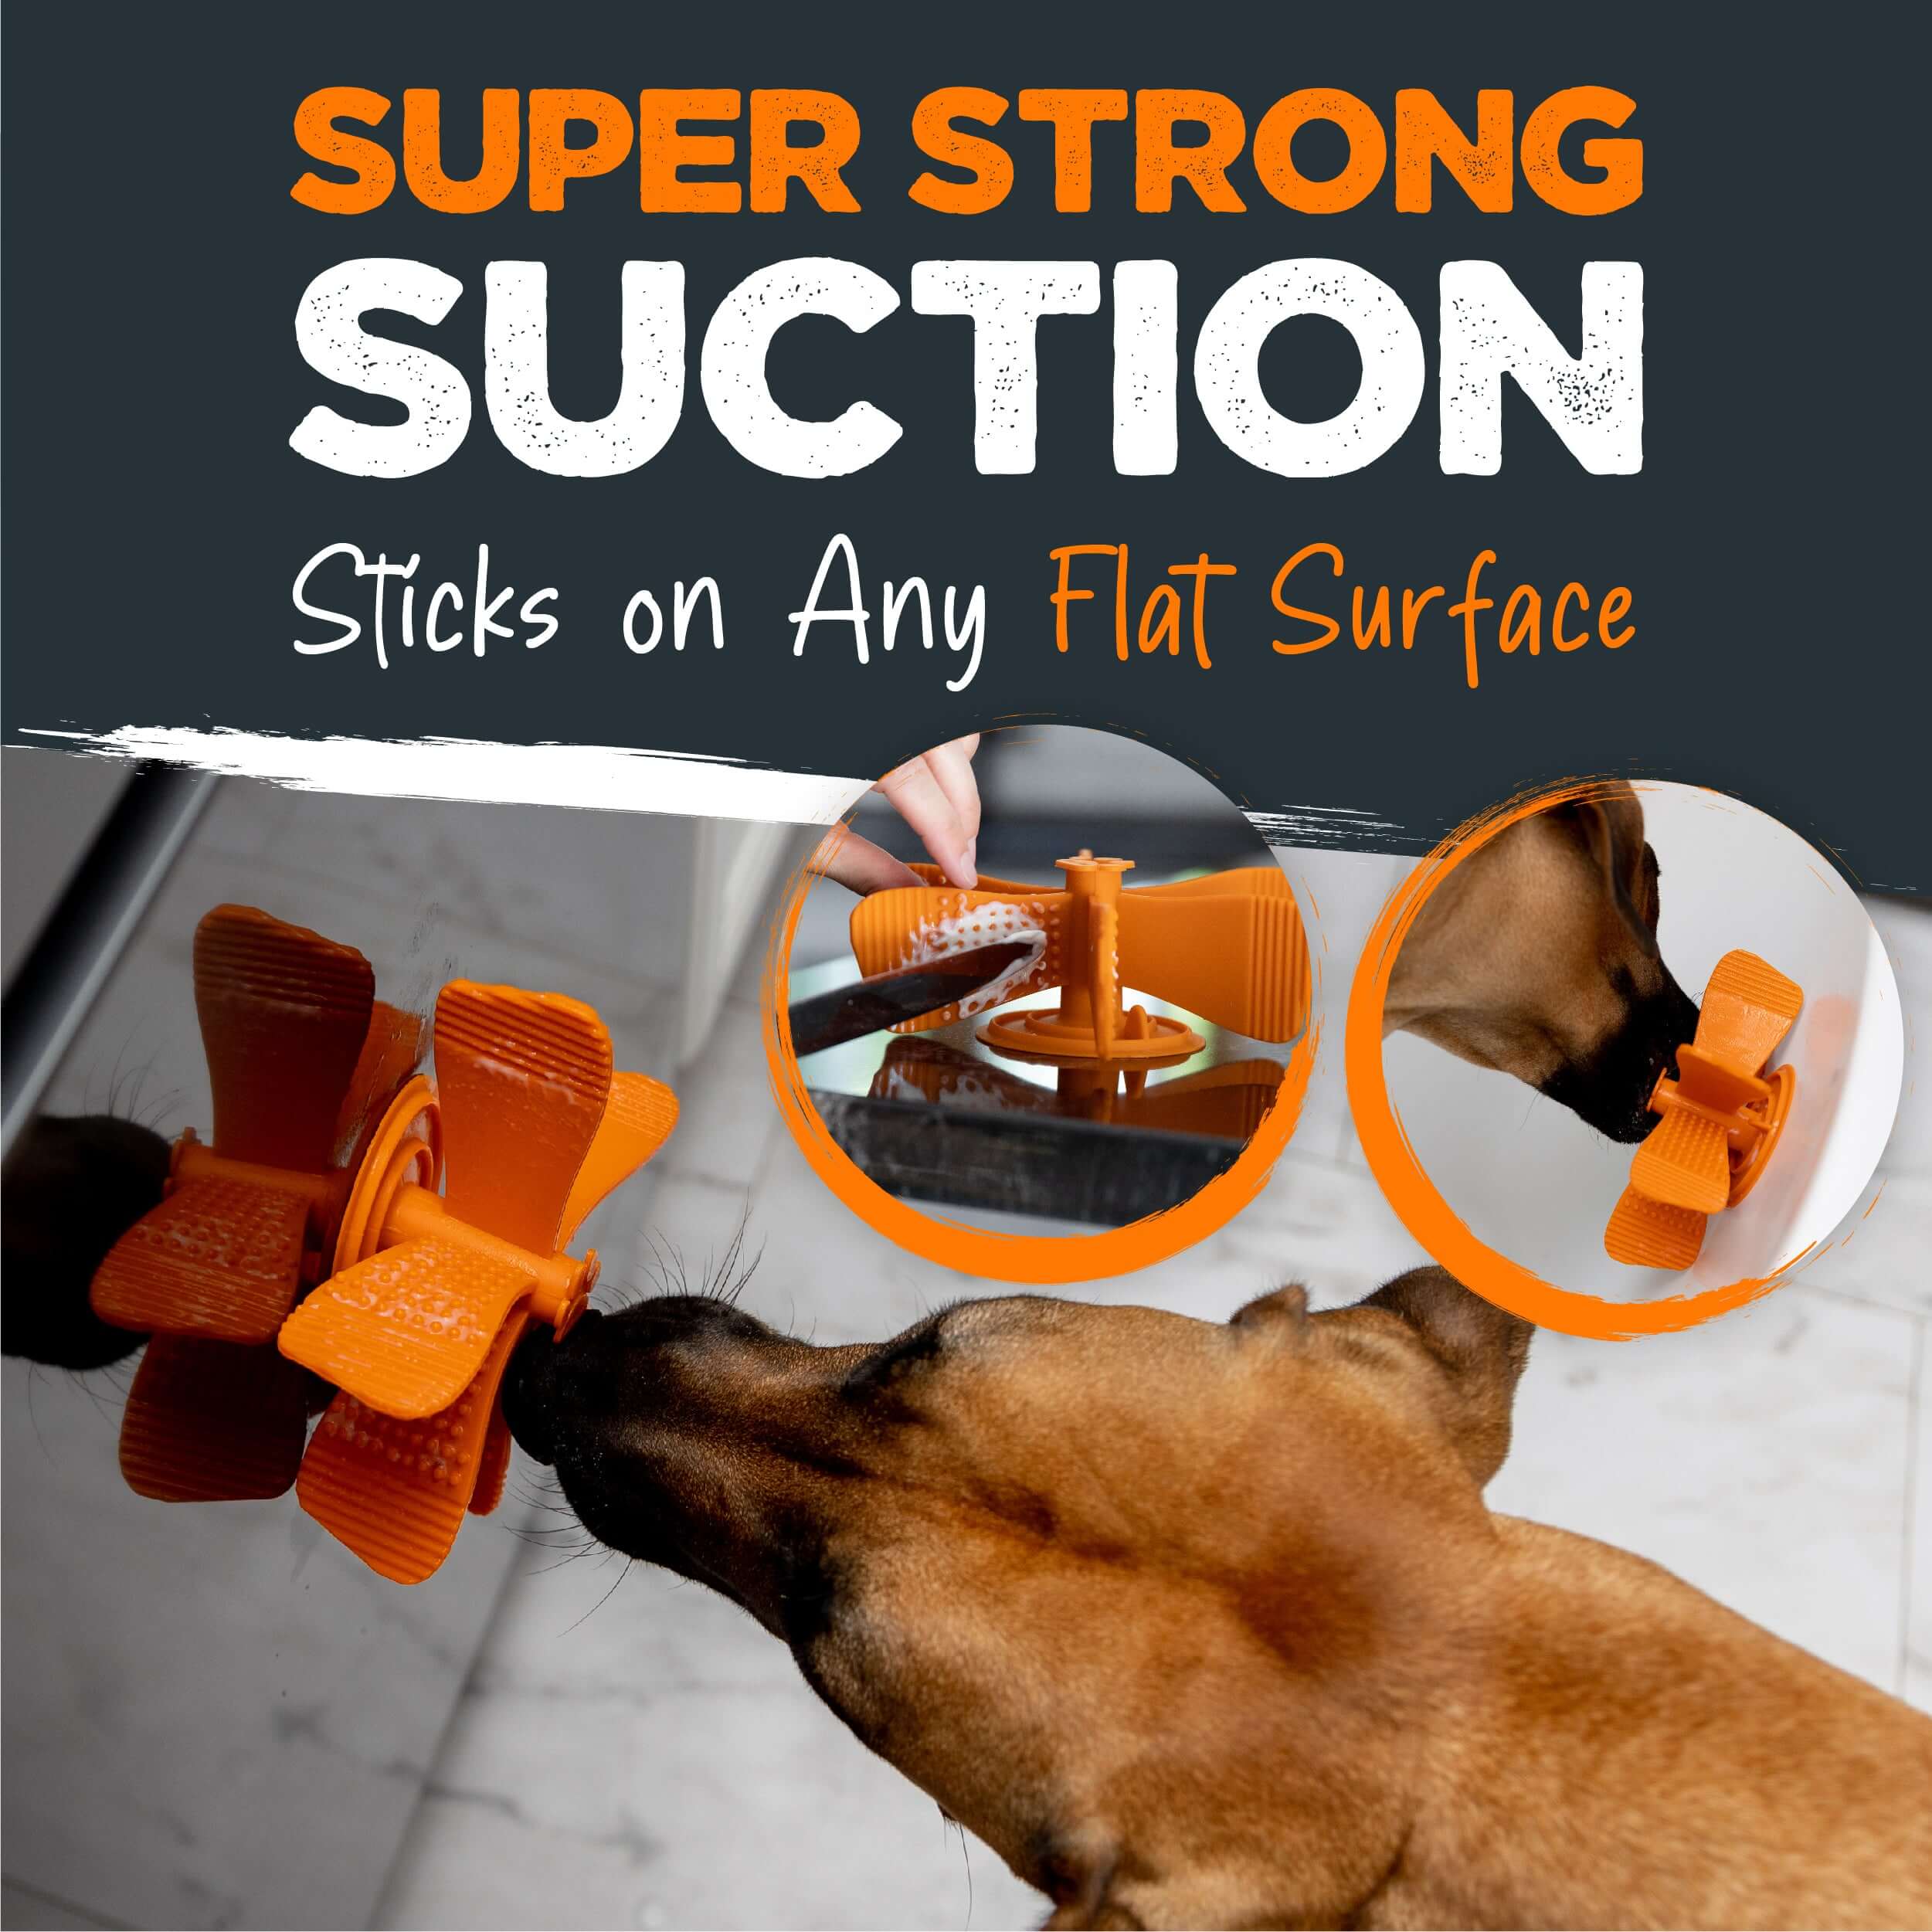 Pet Supplies Bathing Distraction Pad Dog Silicone Slow Feeder